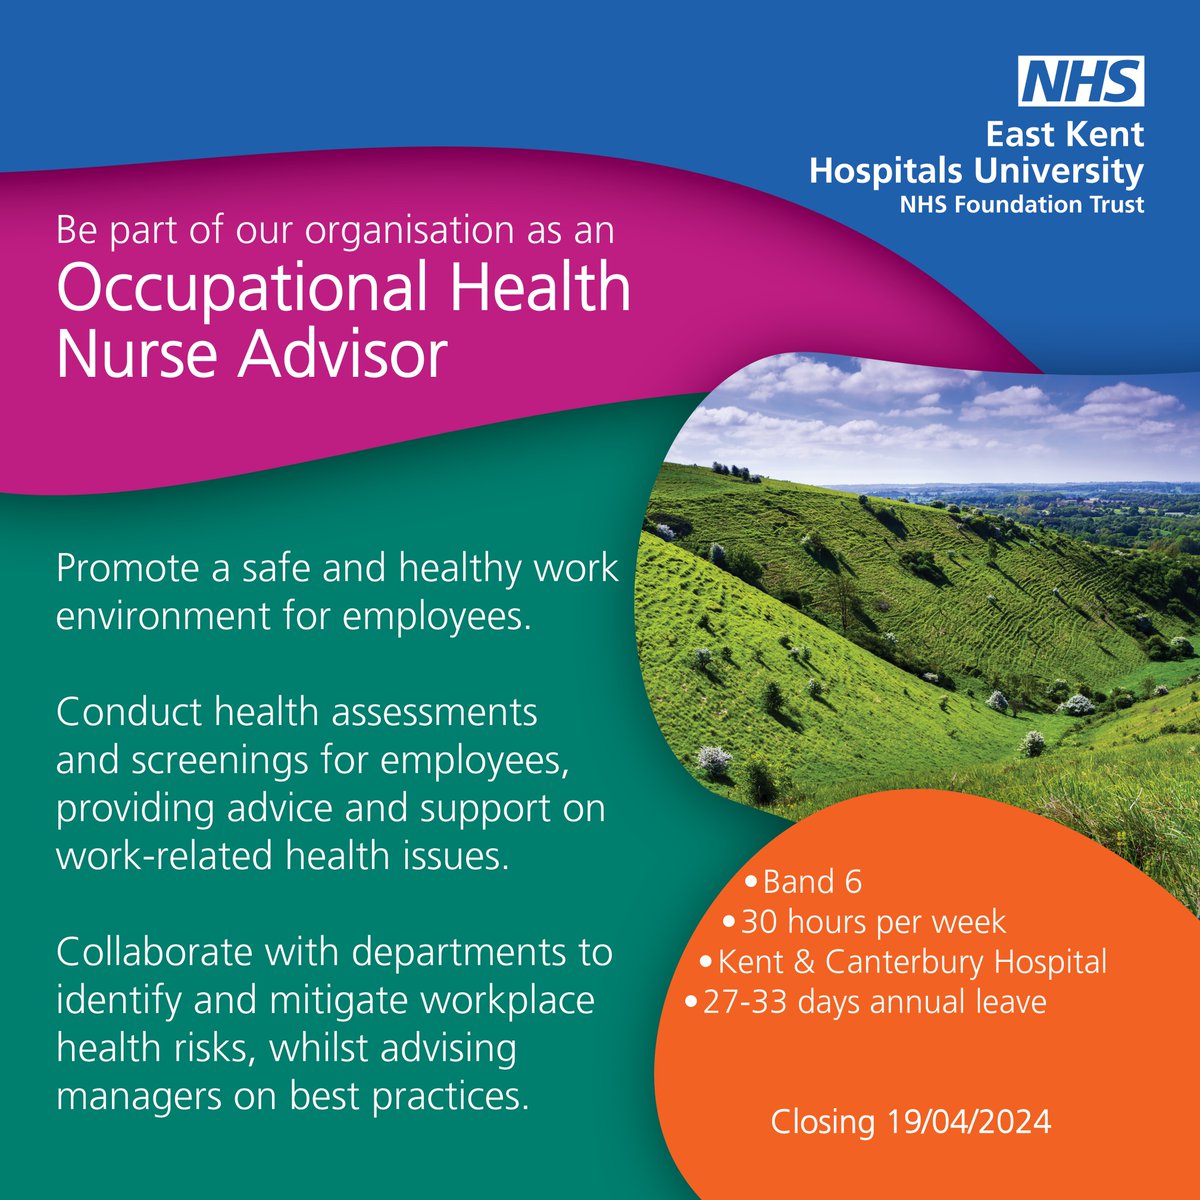 💙 Want to make a difference in people's work lives? We're looking for an Occupational Health Nurse Advisor to join our team!

 ➡️ orlo.uk/OHNA_3wdSS

#EKHUFT #NHSJobs #NHScareers #wearethenhs #healthcarecareers #KentJobs #JobOpportunity #HealthcareHeroes #JoinOurTeam